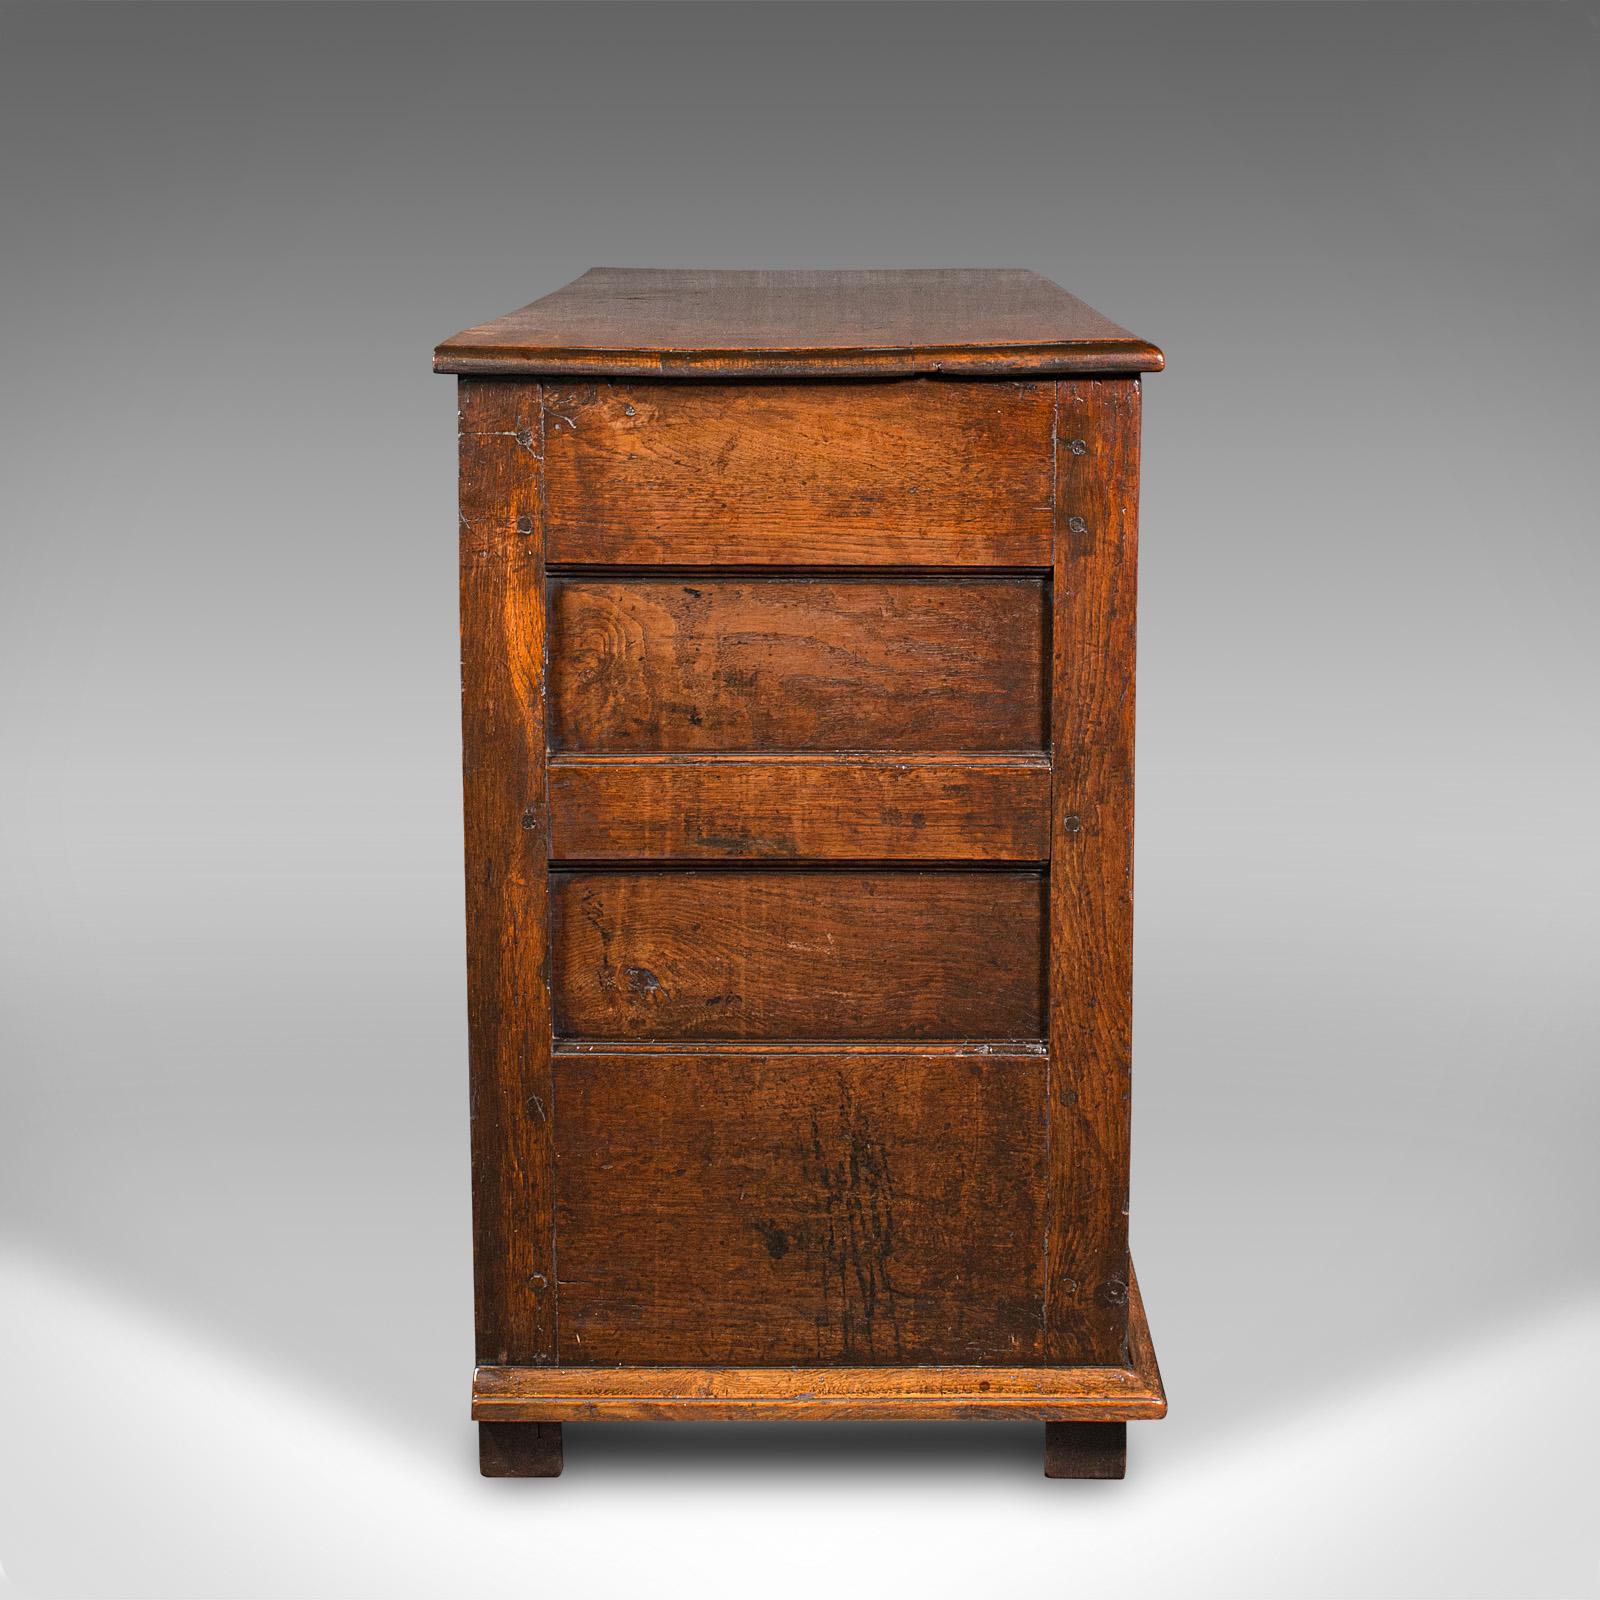 Antique Country Housekeeper's Cabinet, English Oak, Dresser Base, Georgian, 1800 In Good Condition For Sale In Hele, Devon, GB